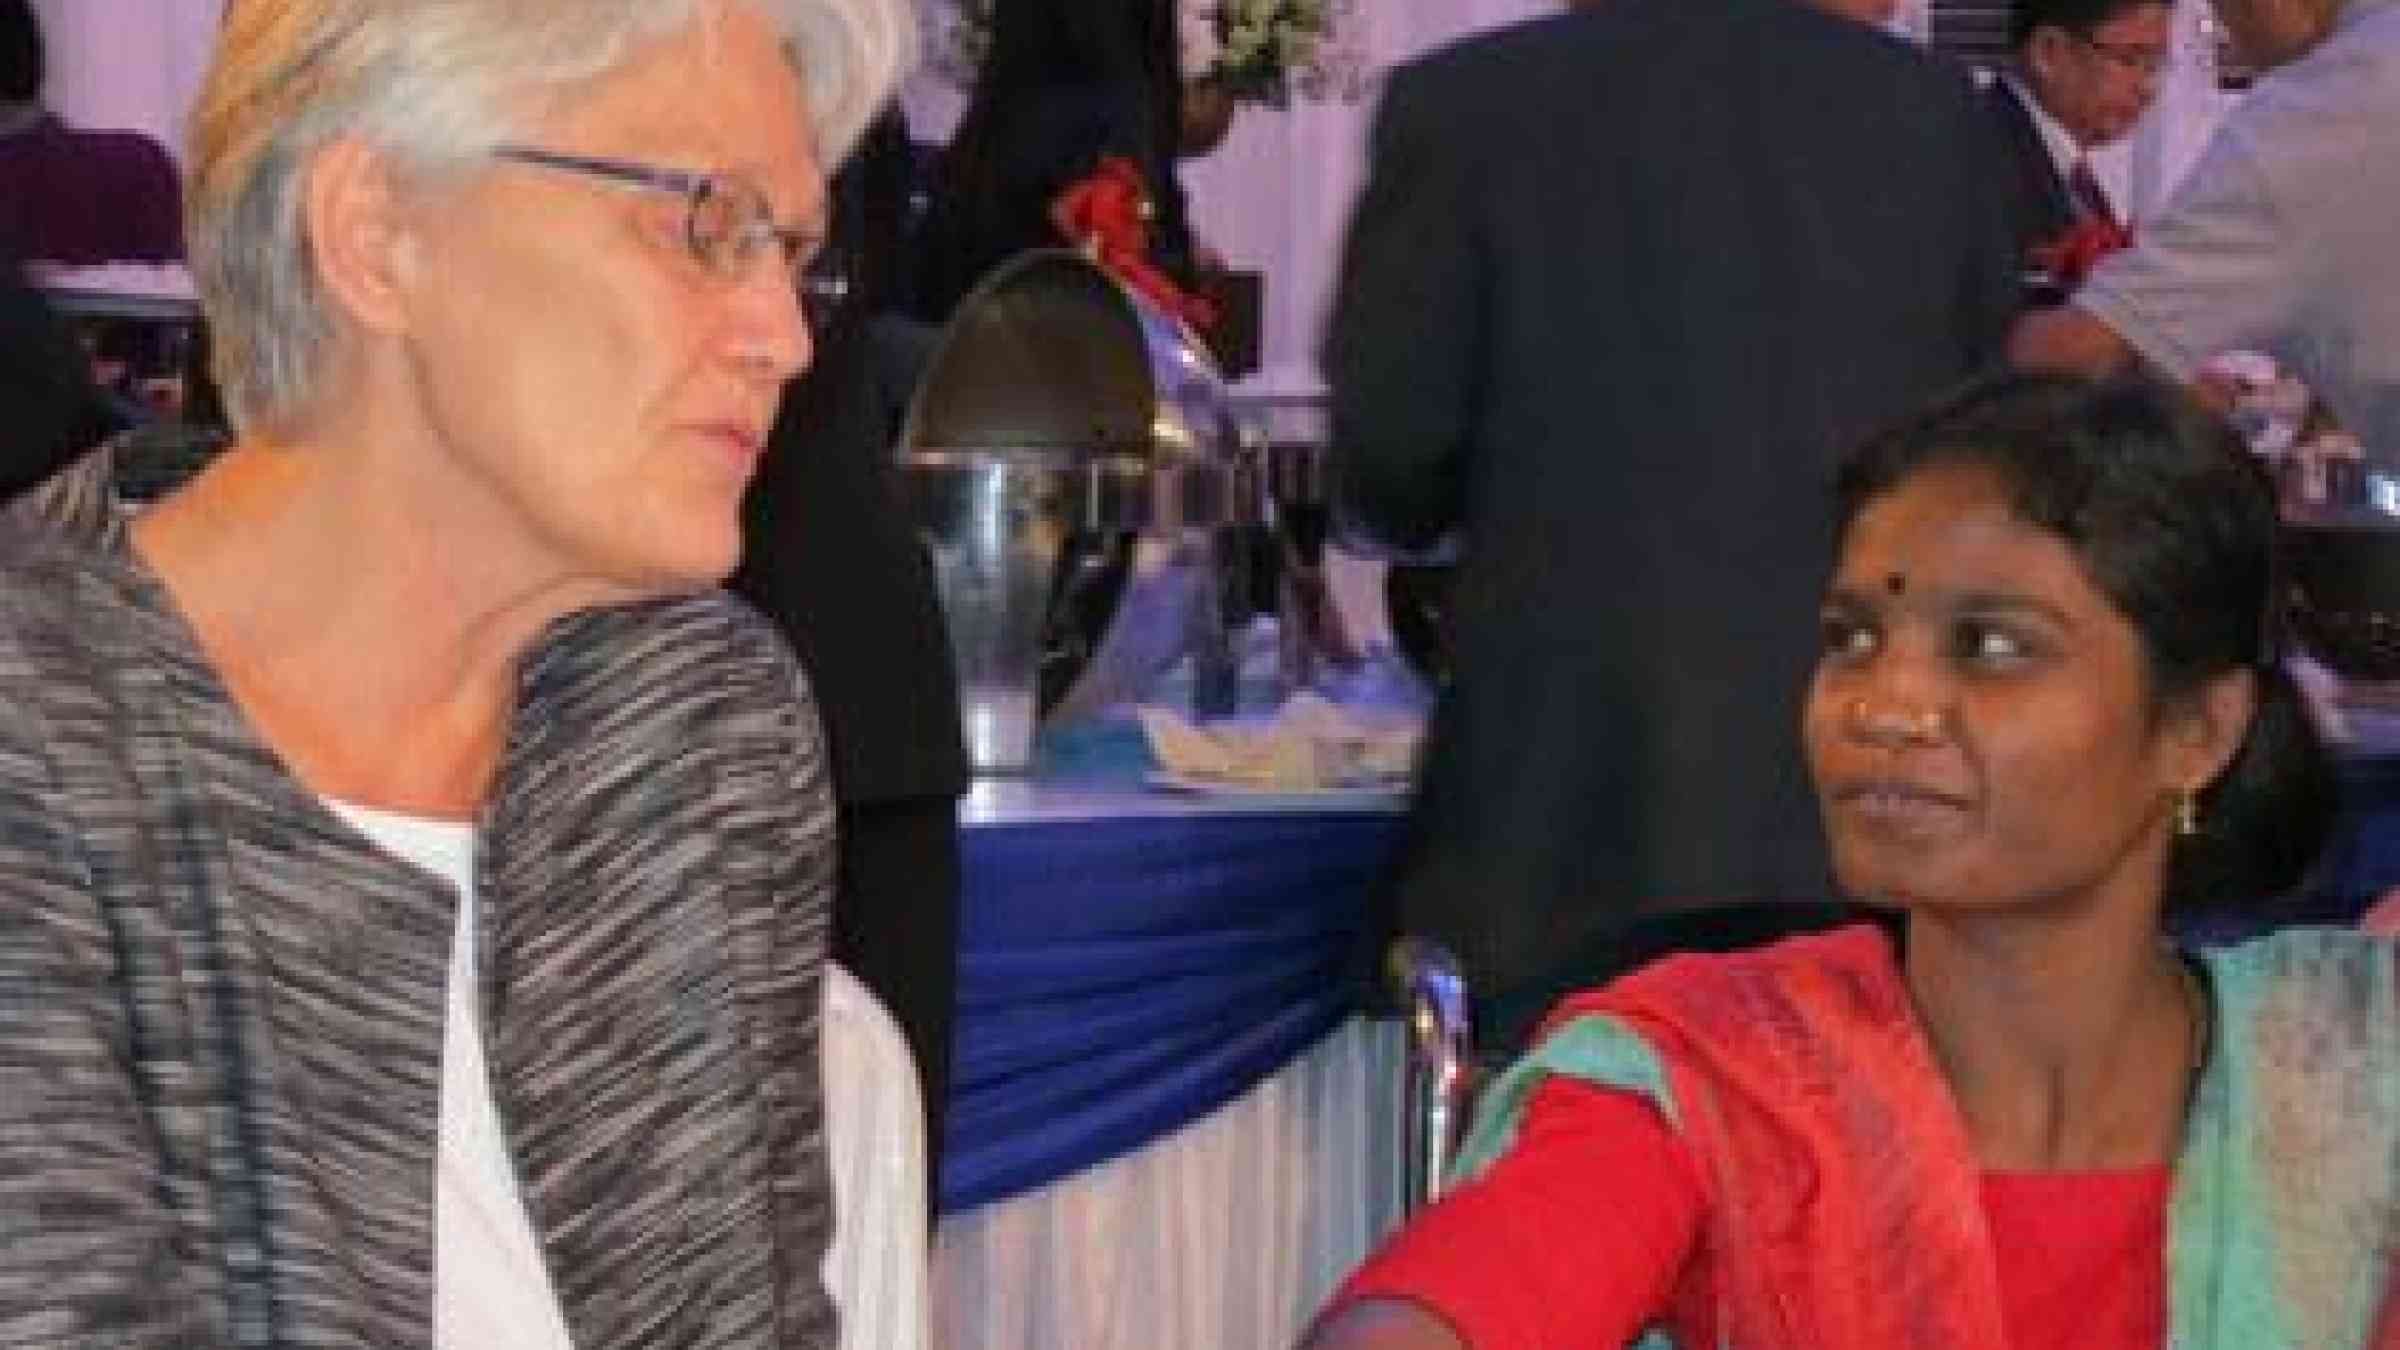 UNISDR chief Margareta Wahlstrom chatting with Kazol Rekha, a 24 year old disabled woman from Bangladesh whose life is featured in a winning entry at the first UNISDR Asian Film Festival on Disaster Risk Reduction.